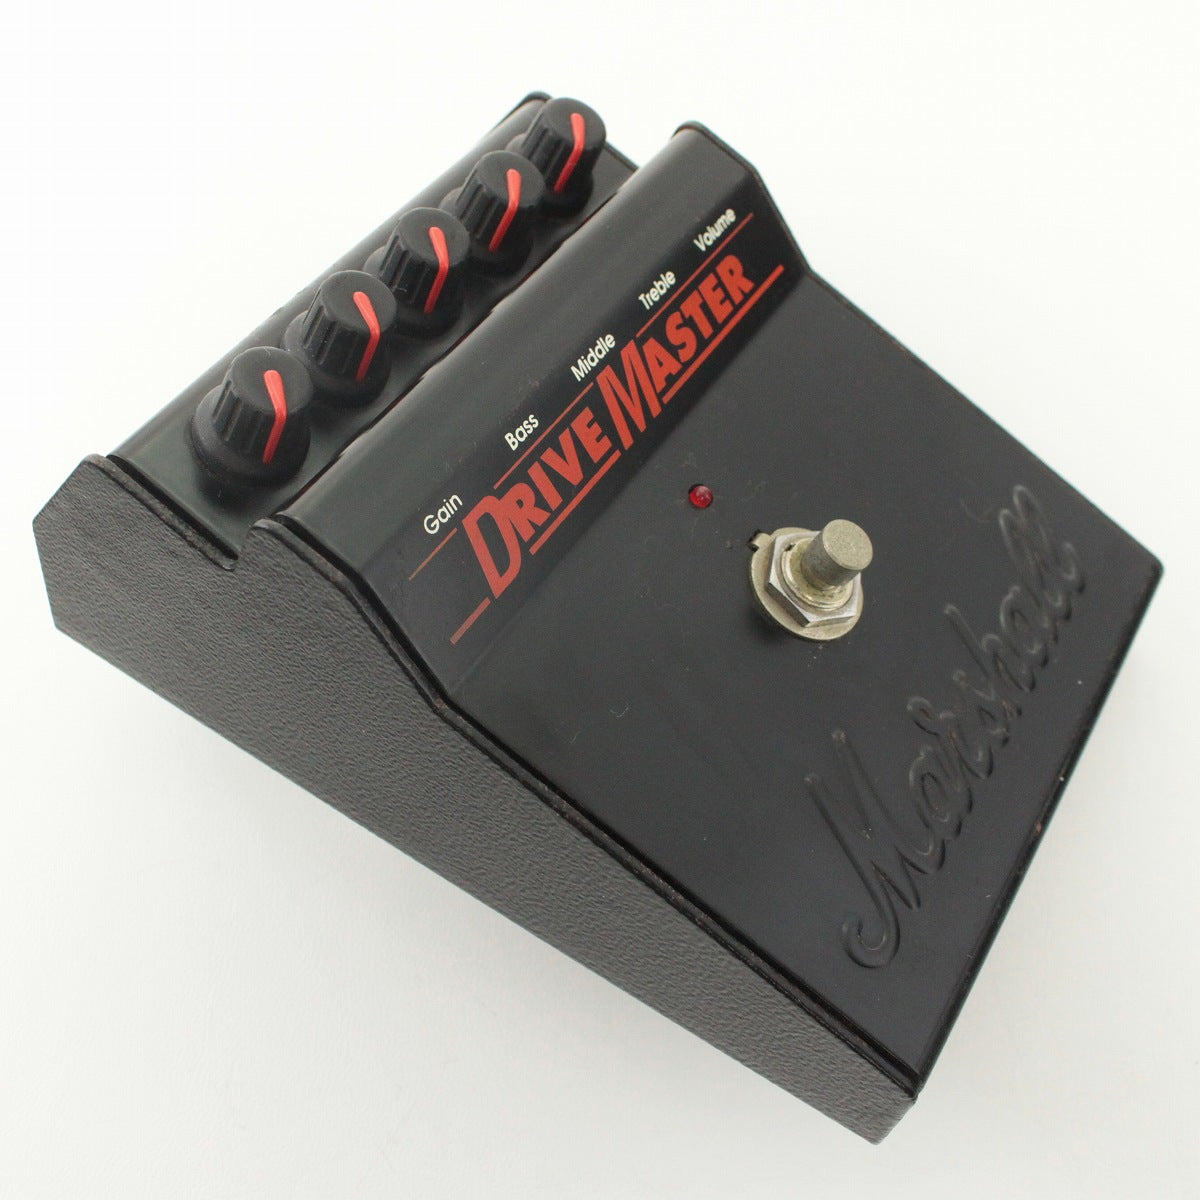 [SN D02160] USED MARSHALL / DRIVE MASTER Mede in England [03]